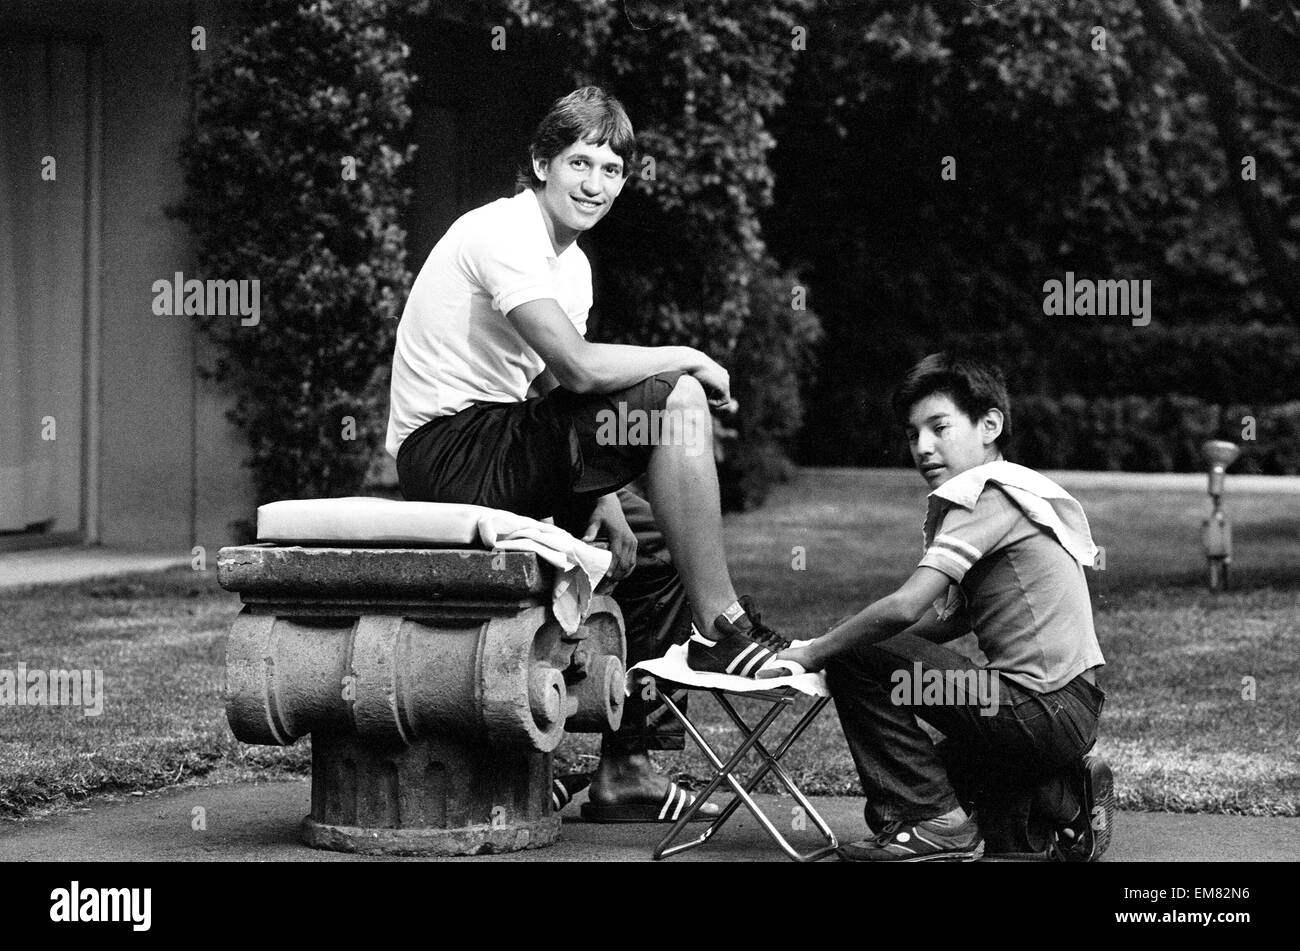 England footballer Gary Lineker has his boots cleaned by a shoe shine boy at the team base in Mexico during the 1986 World Cup tournament. June 1986. Stock Photo